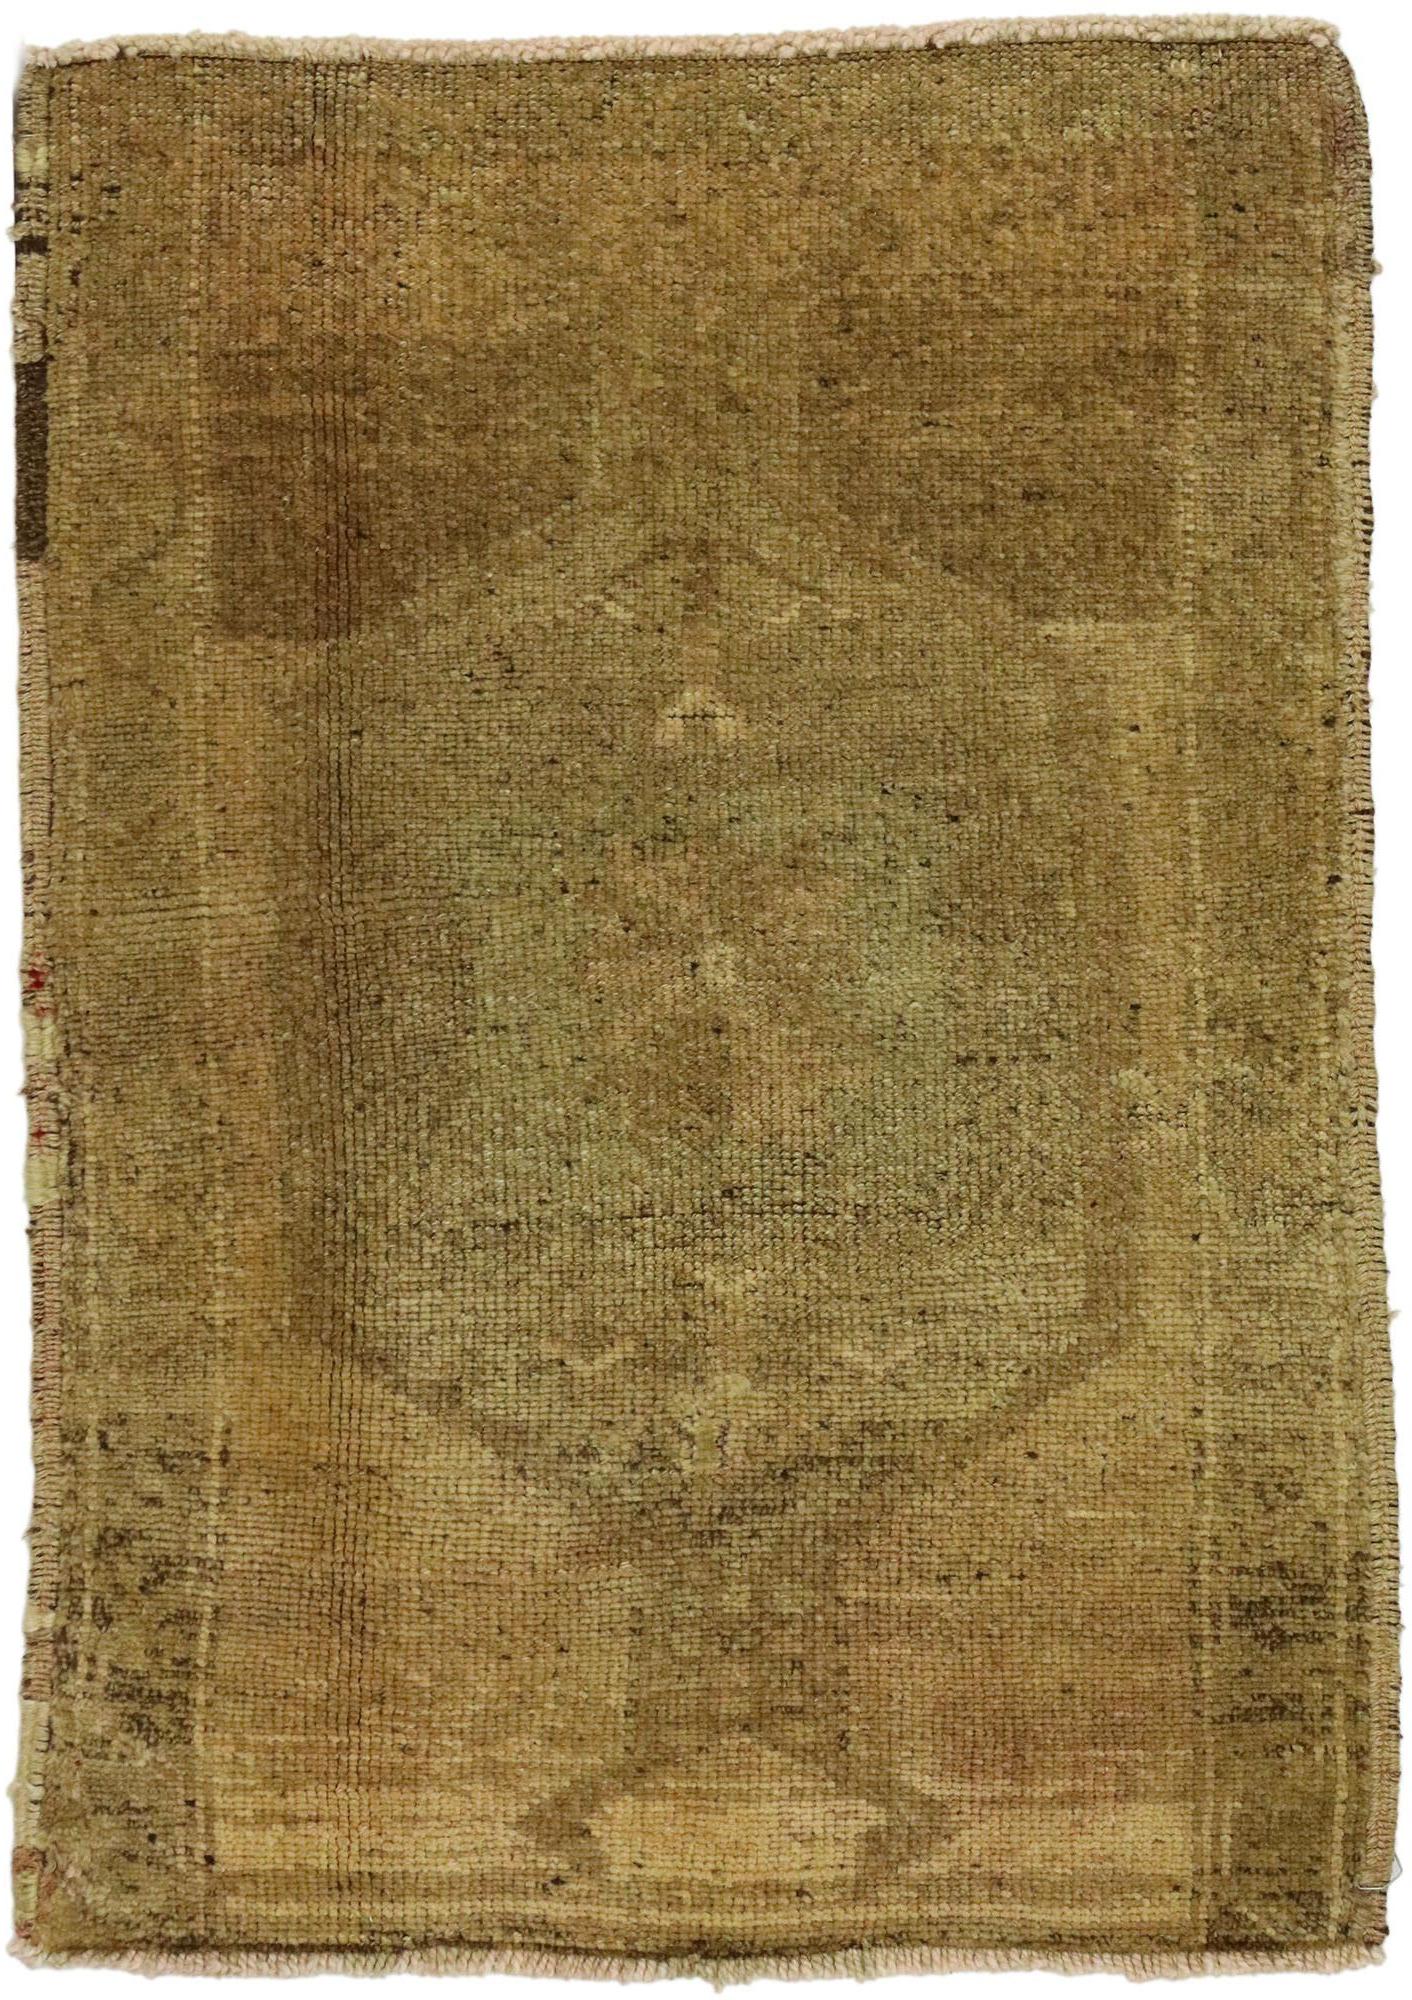 51421 Vintage Turkish Oushak Yastik Scatter Rug, Small Accent Rug 02'01 x 03'00. This hand-knotted wool vintage Turkish Oushak yastik scatter rug features an inconspicuous hexagonal medallion floating in an abrashed field. It is enclosed with a